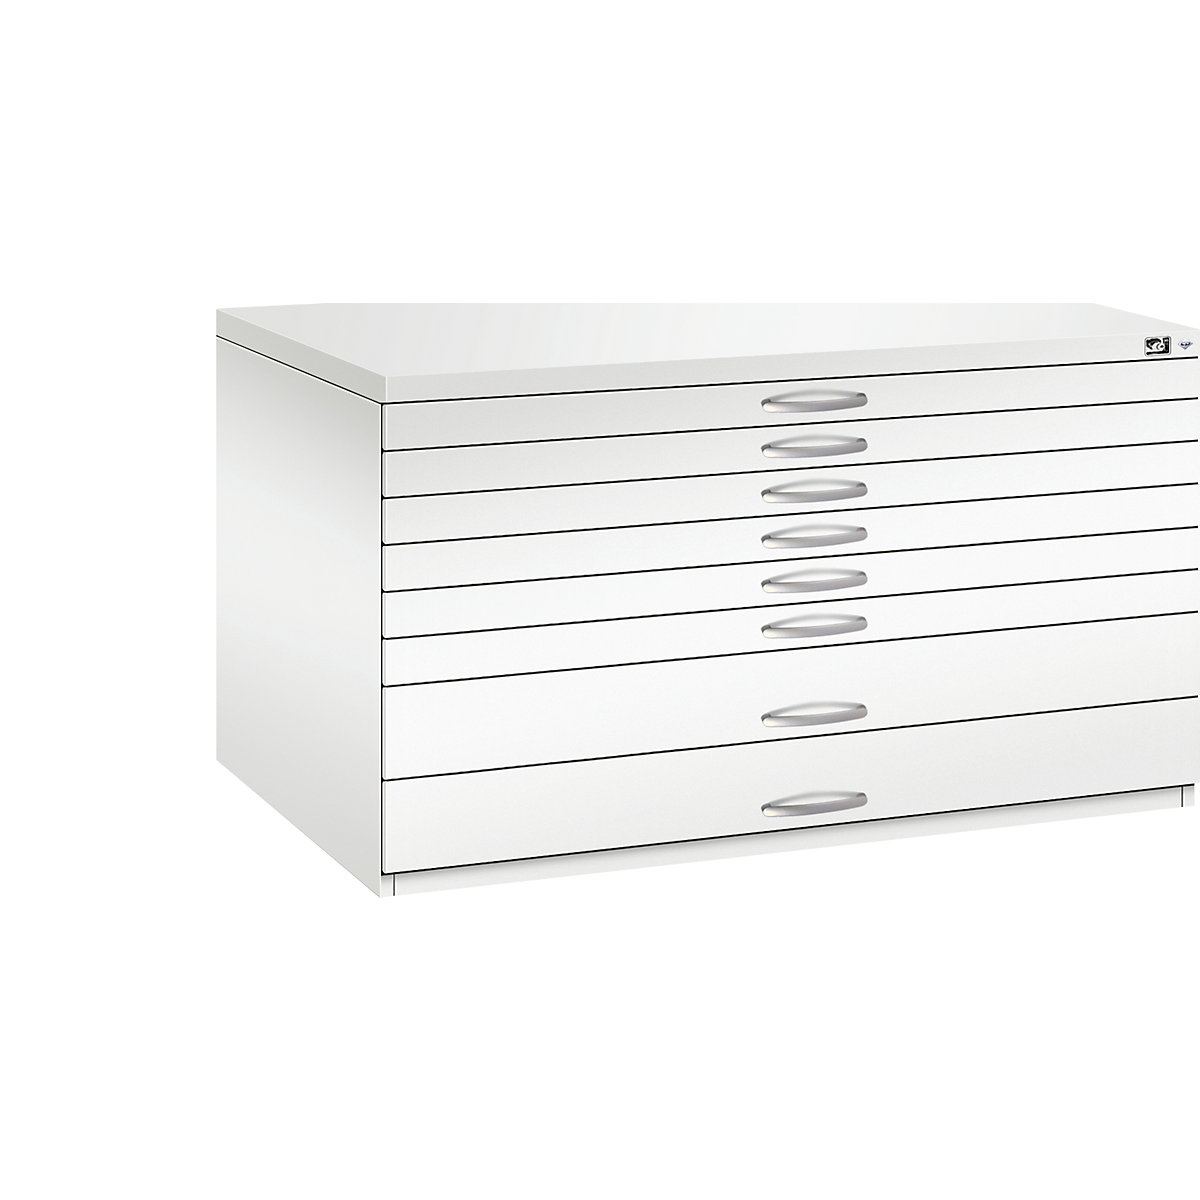 Drawing cabinet – C+P, A0, 8 drawers, height 760 mm, traffic white-16